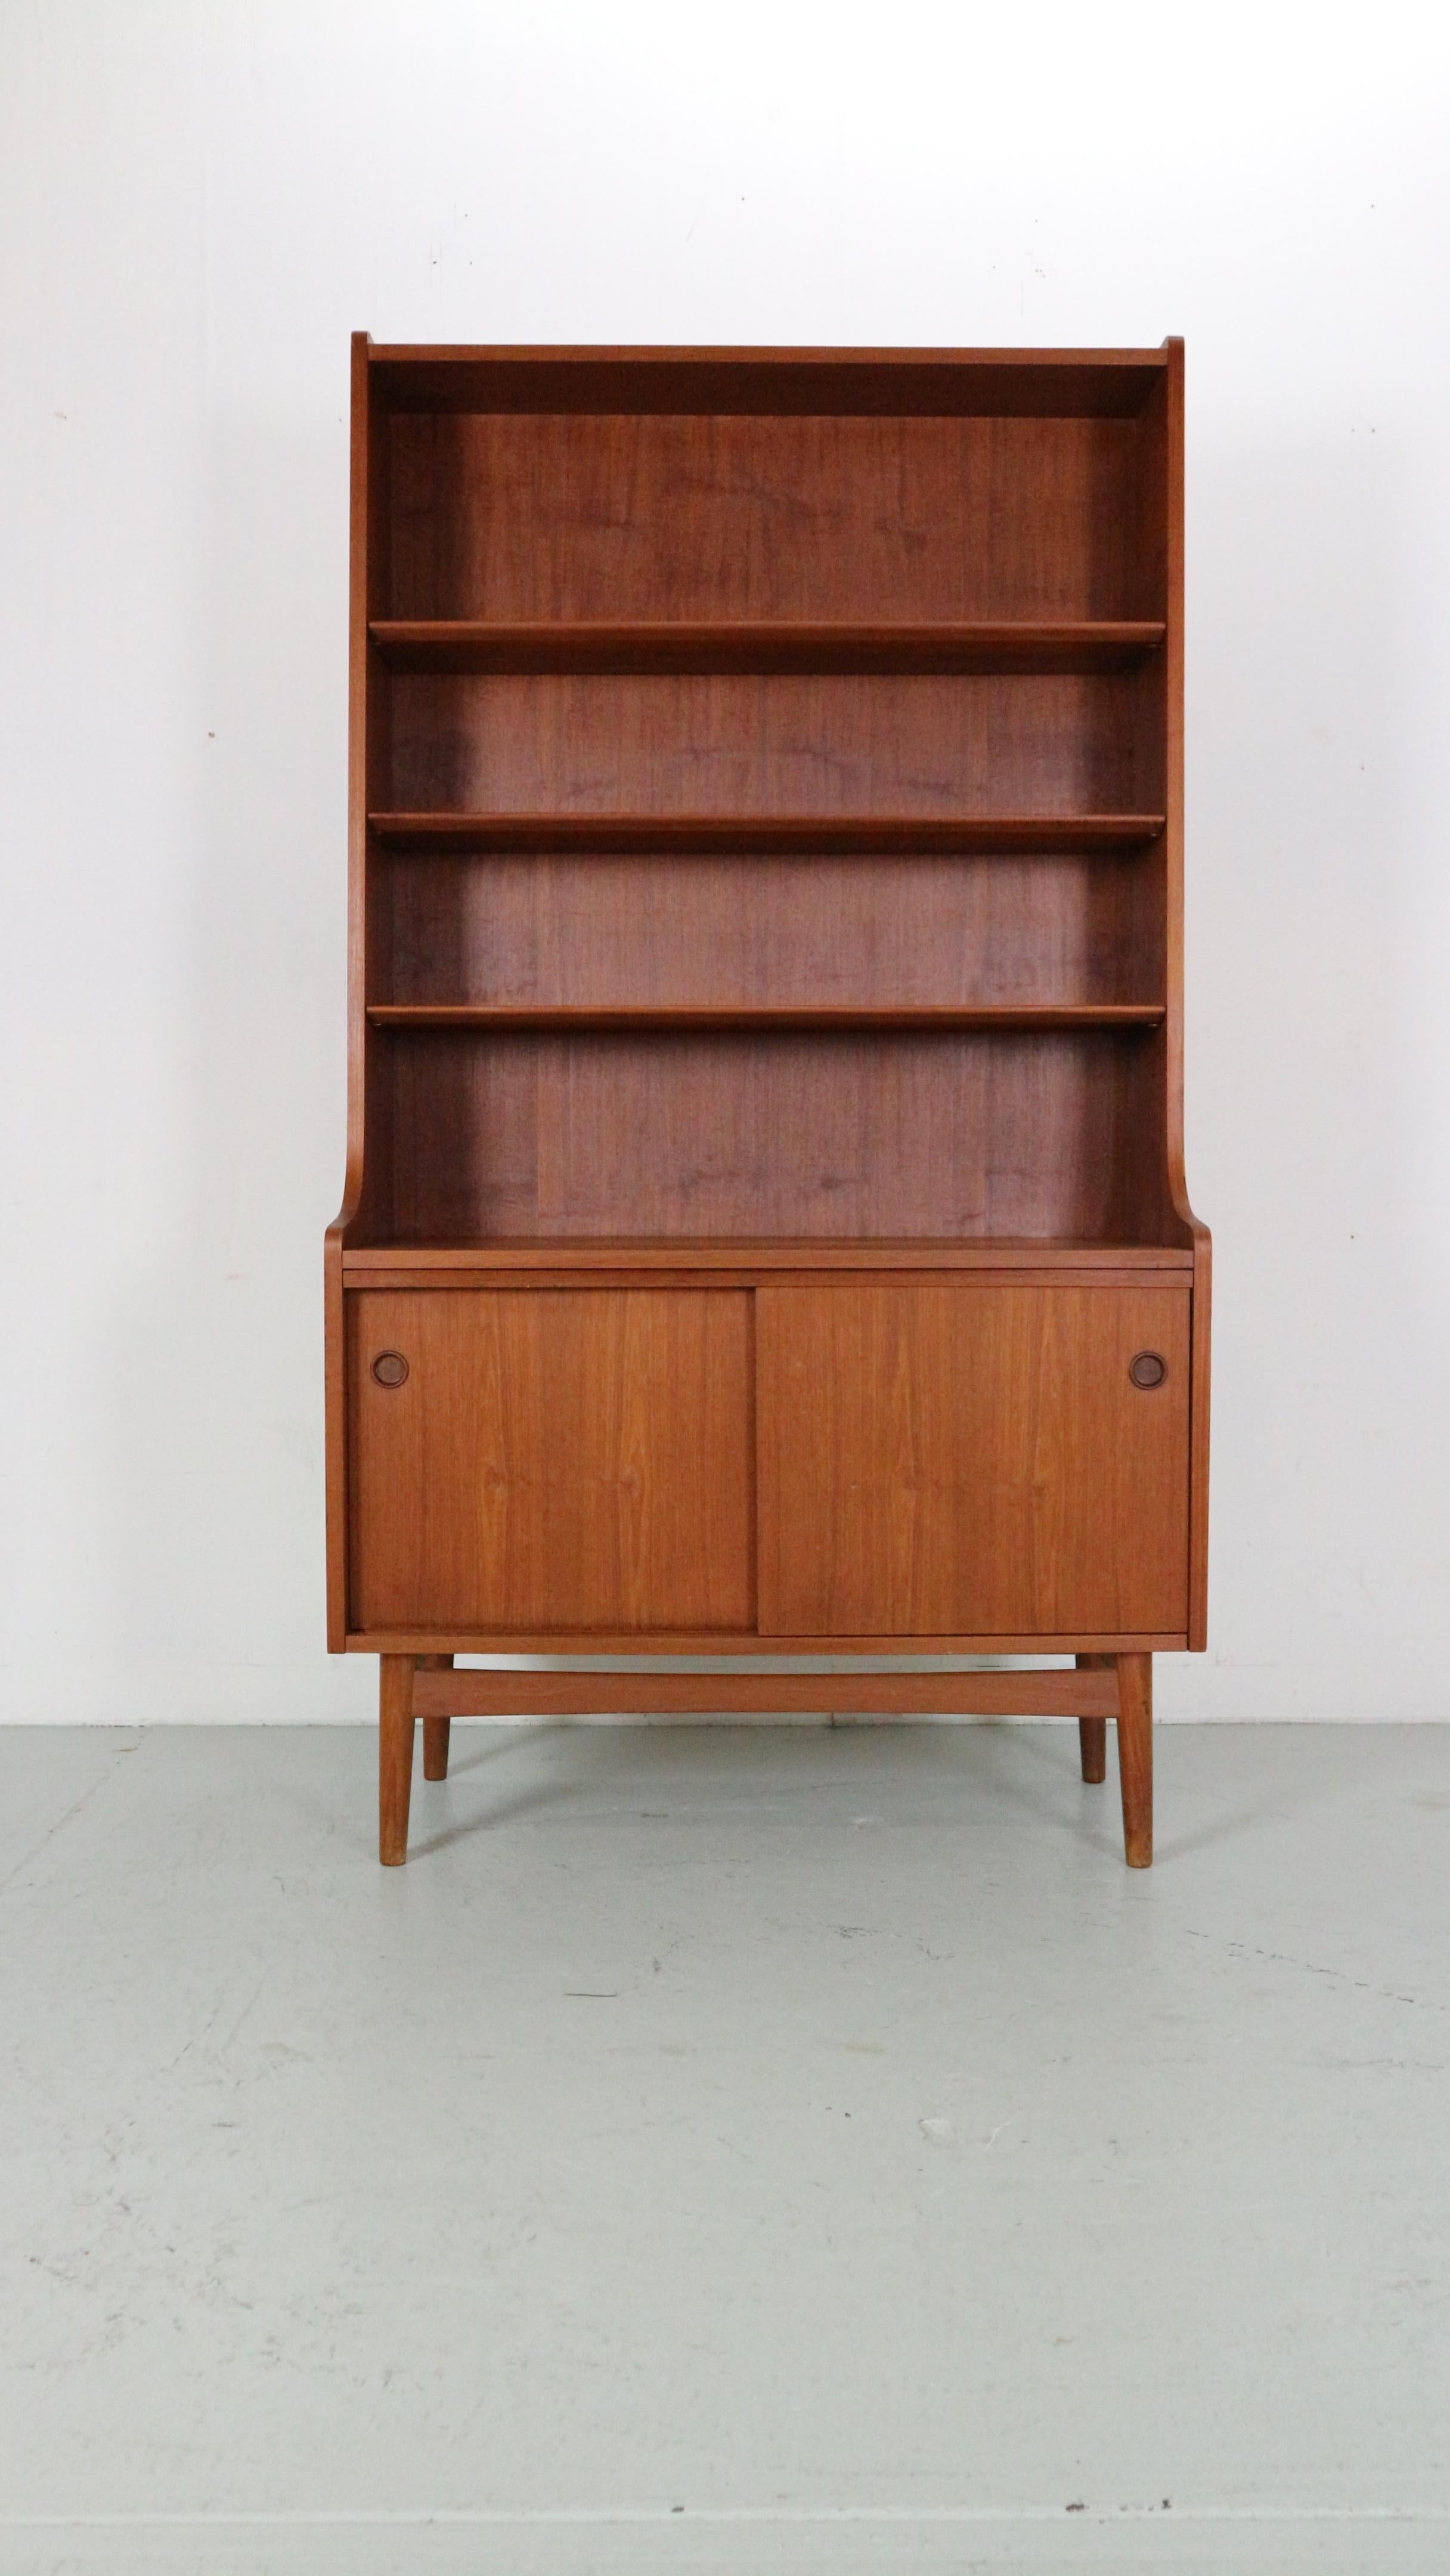 This Classic Scandinavian bookcase was designed by Danish master carpenter Johannes Sorth for Nexø Møbelfabrik, Bornholm in 1956.

The idea was to combine a cabinet and a book case, and it was an instant success.
It was produced in five different